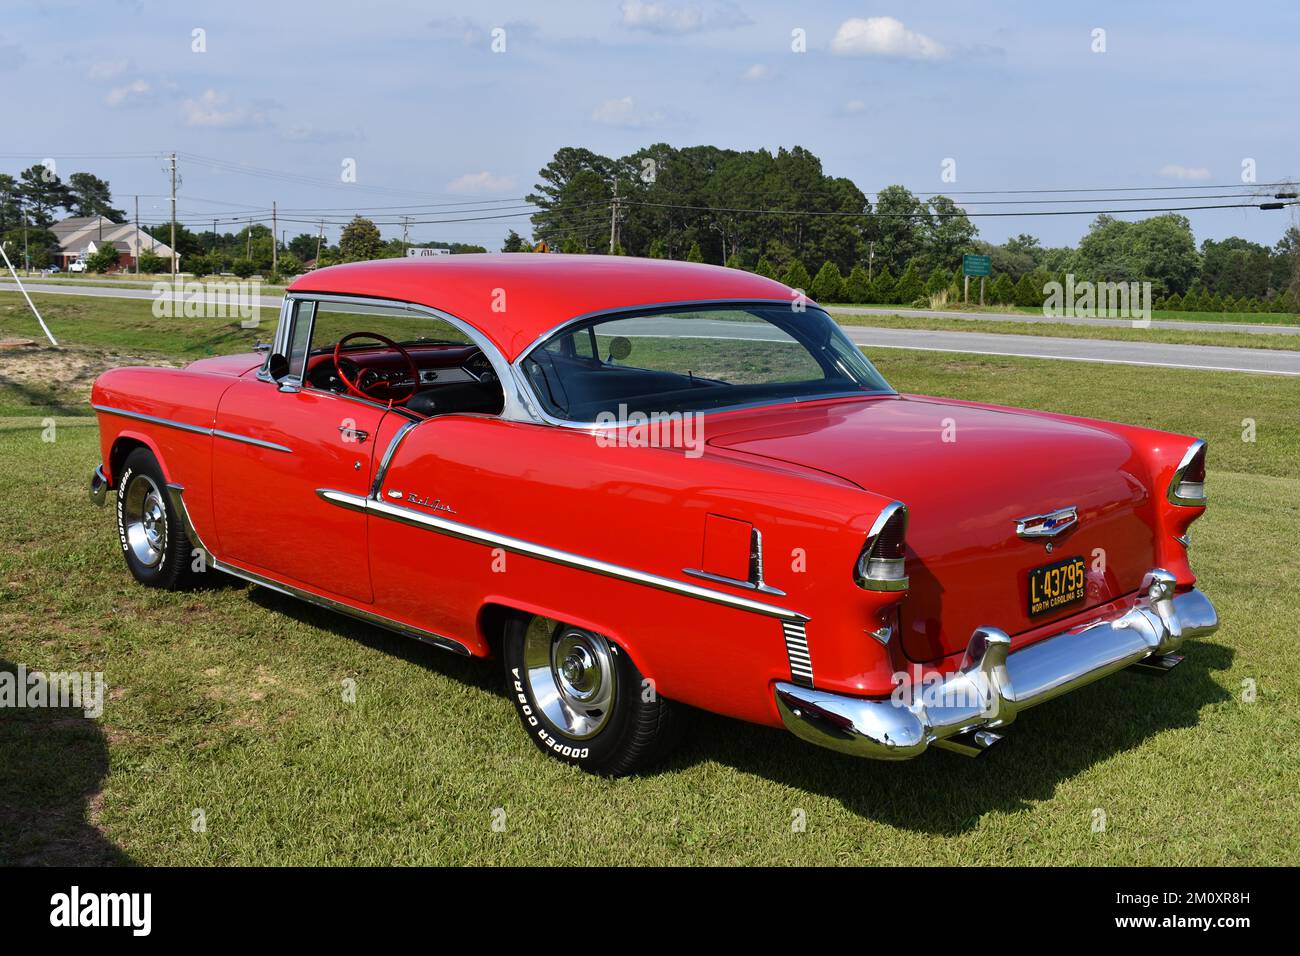 A 1955 Chevrolet Bel Air Hard Top on display at a car show. Stock Photo